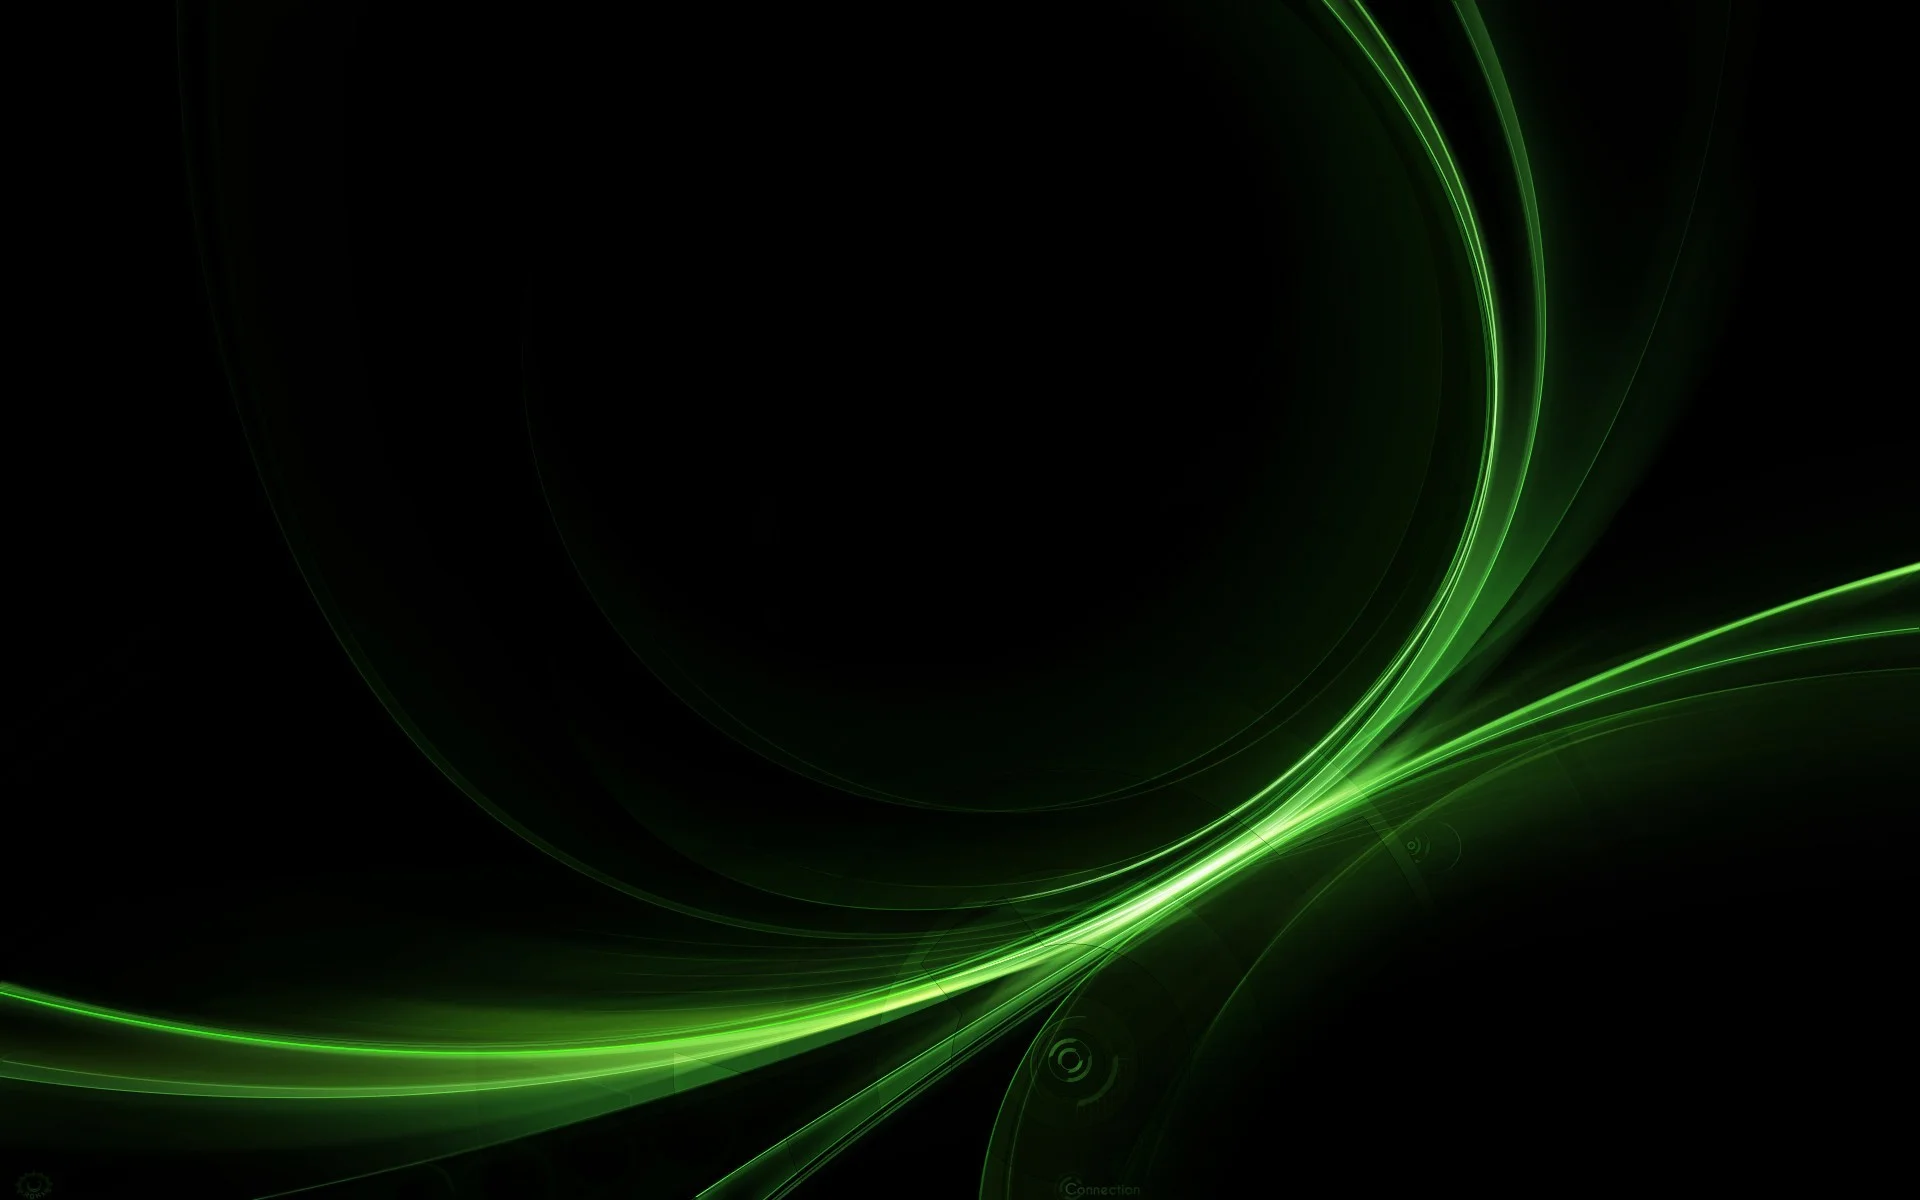 green and black background